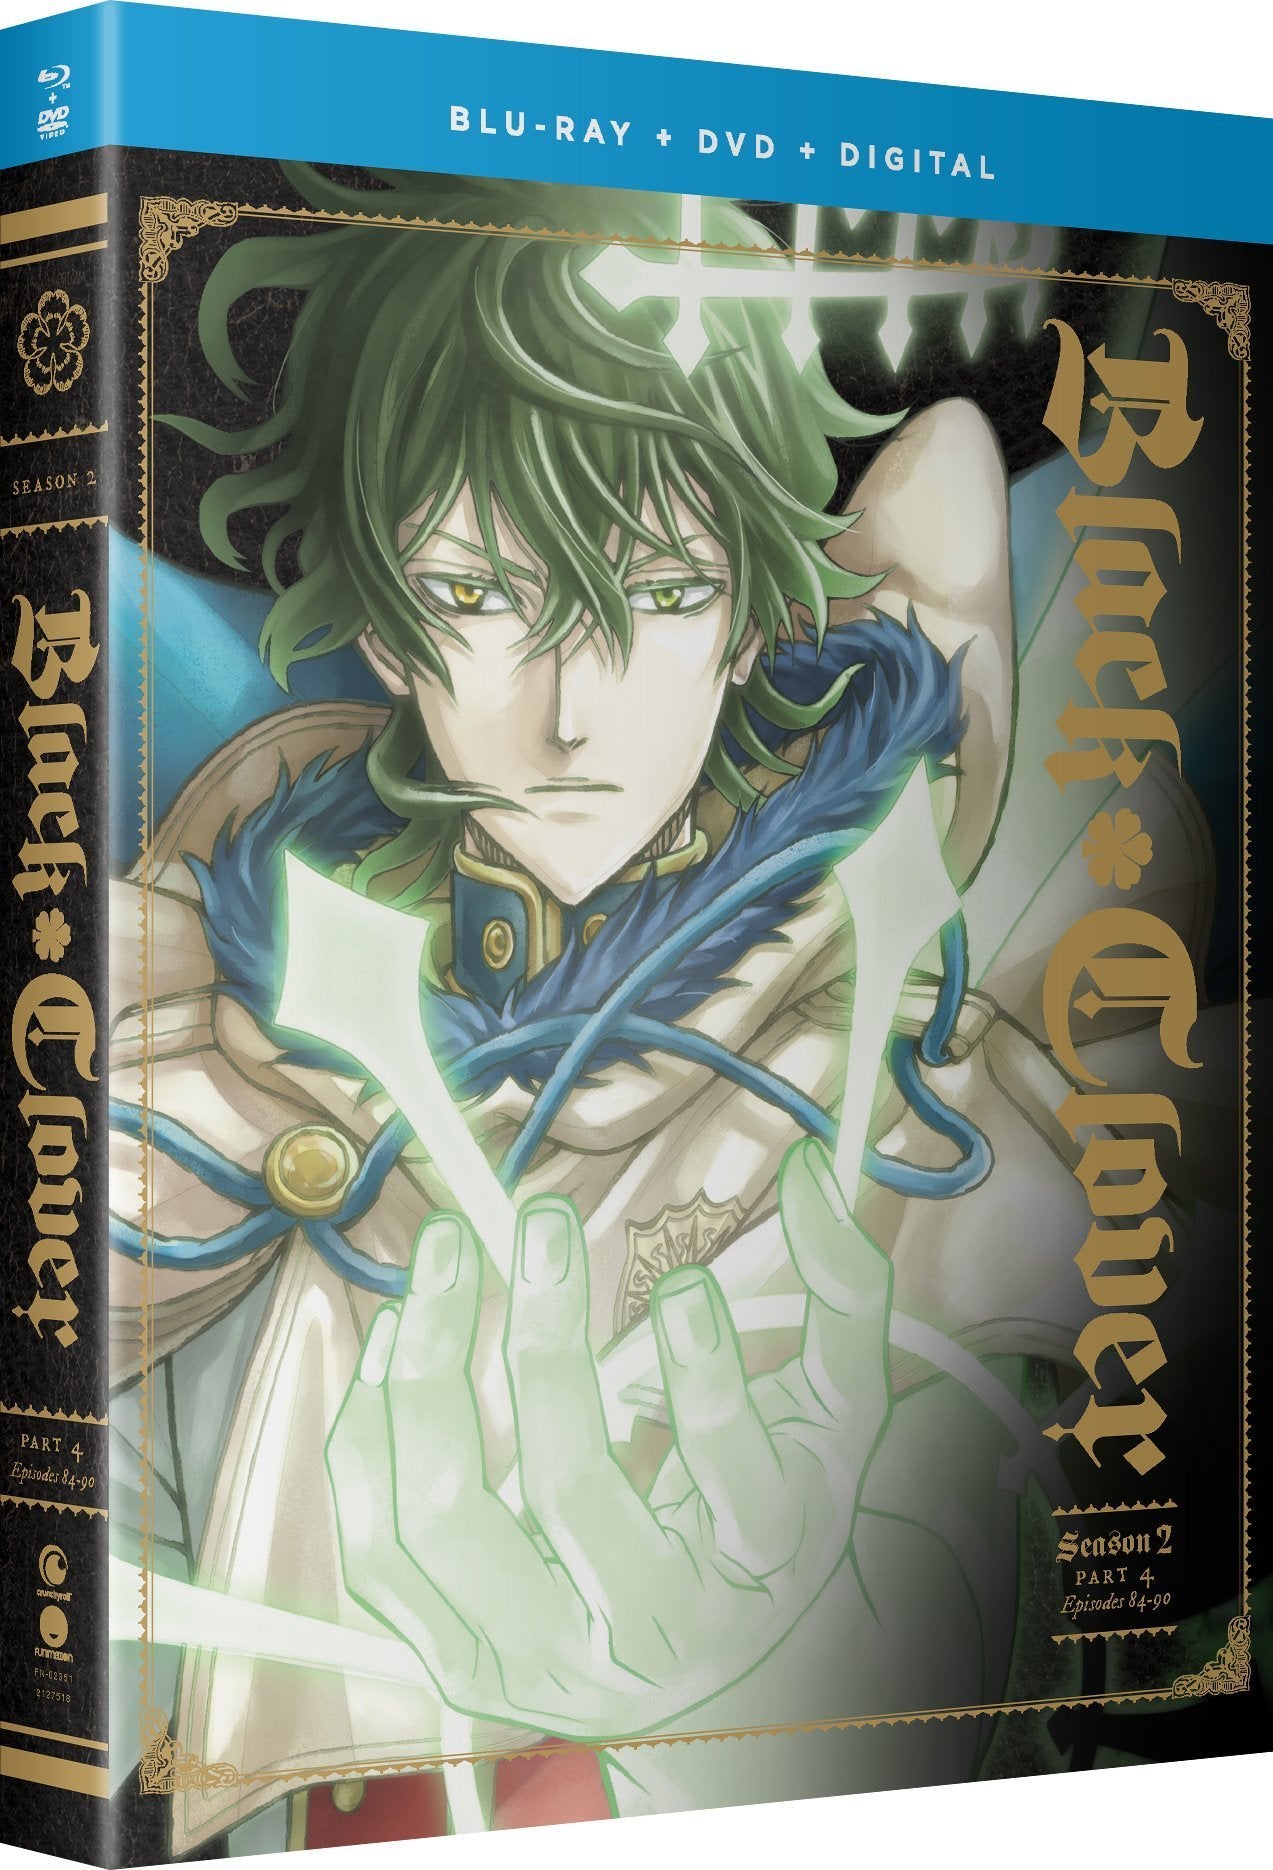 Black Clover - Season 2 Part 4 + Special Episode - Blu-ray + DVD image count 1